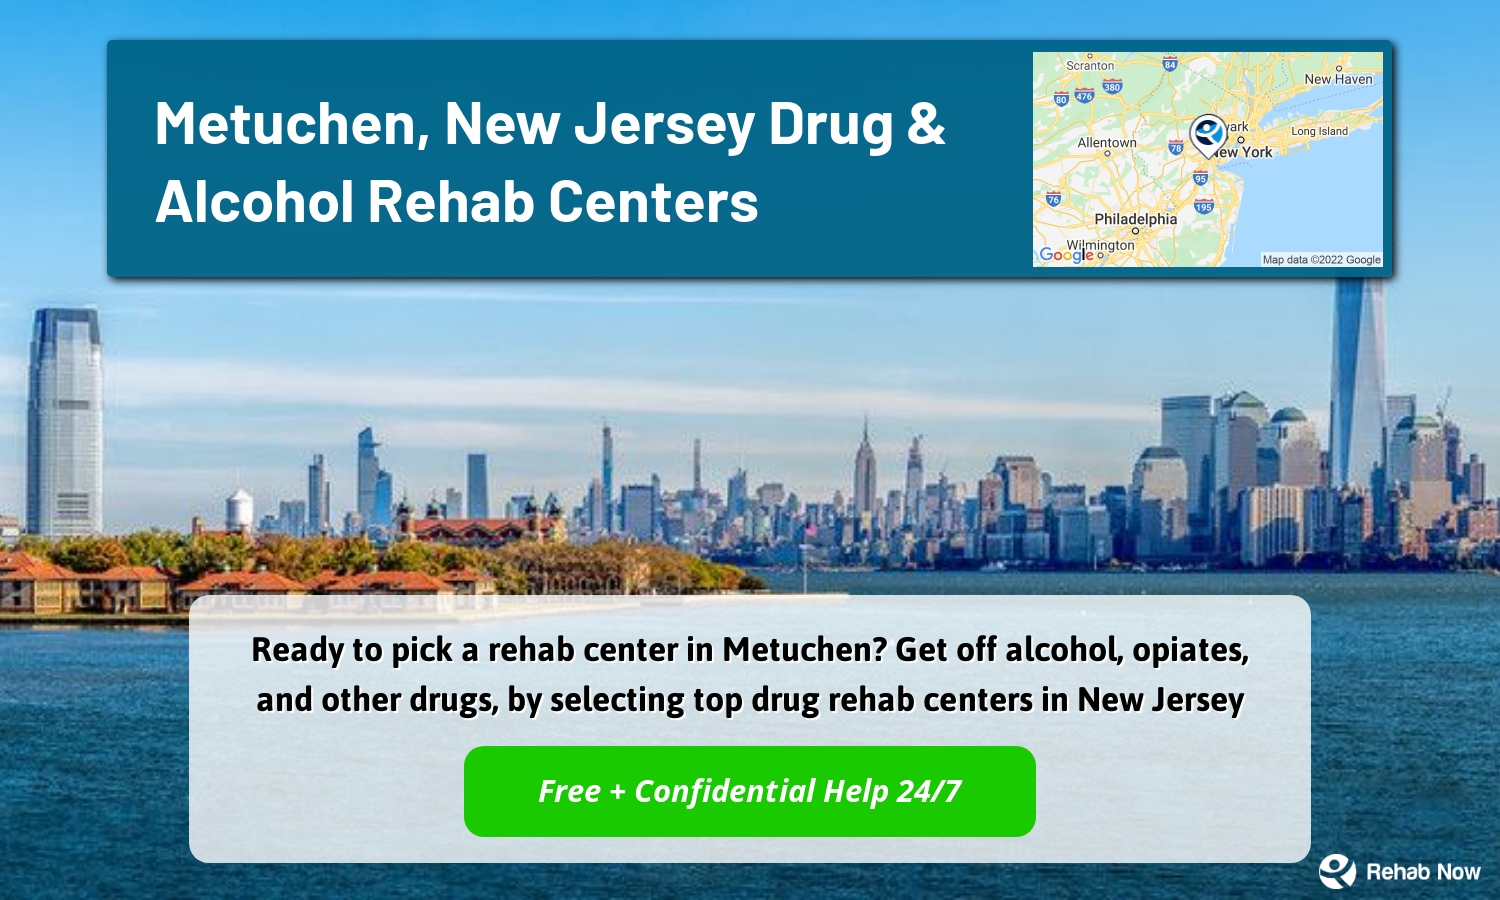 Ready to pick a rehab center in Metuchen? Get off alcohol, opiates, and other drugs, by selecting top drug rehab centers in New Jersey